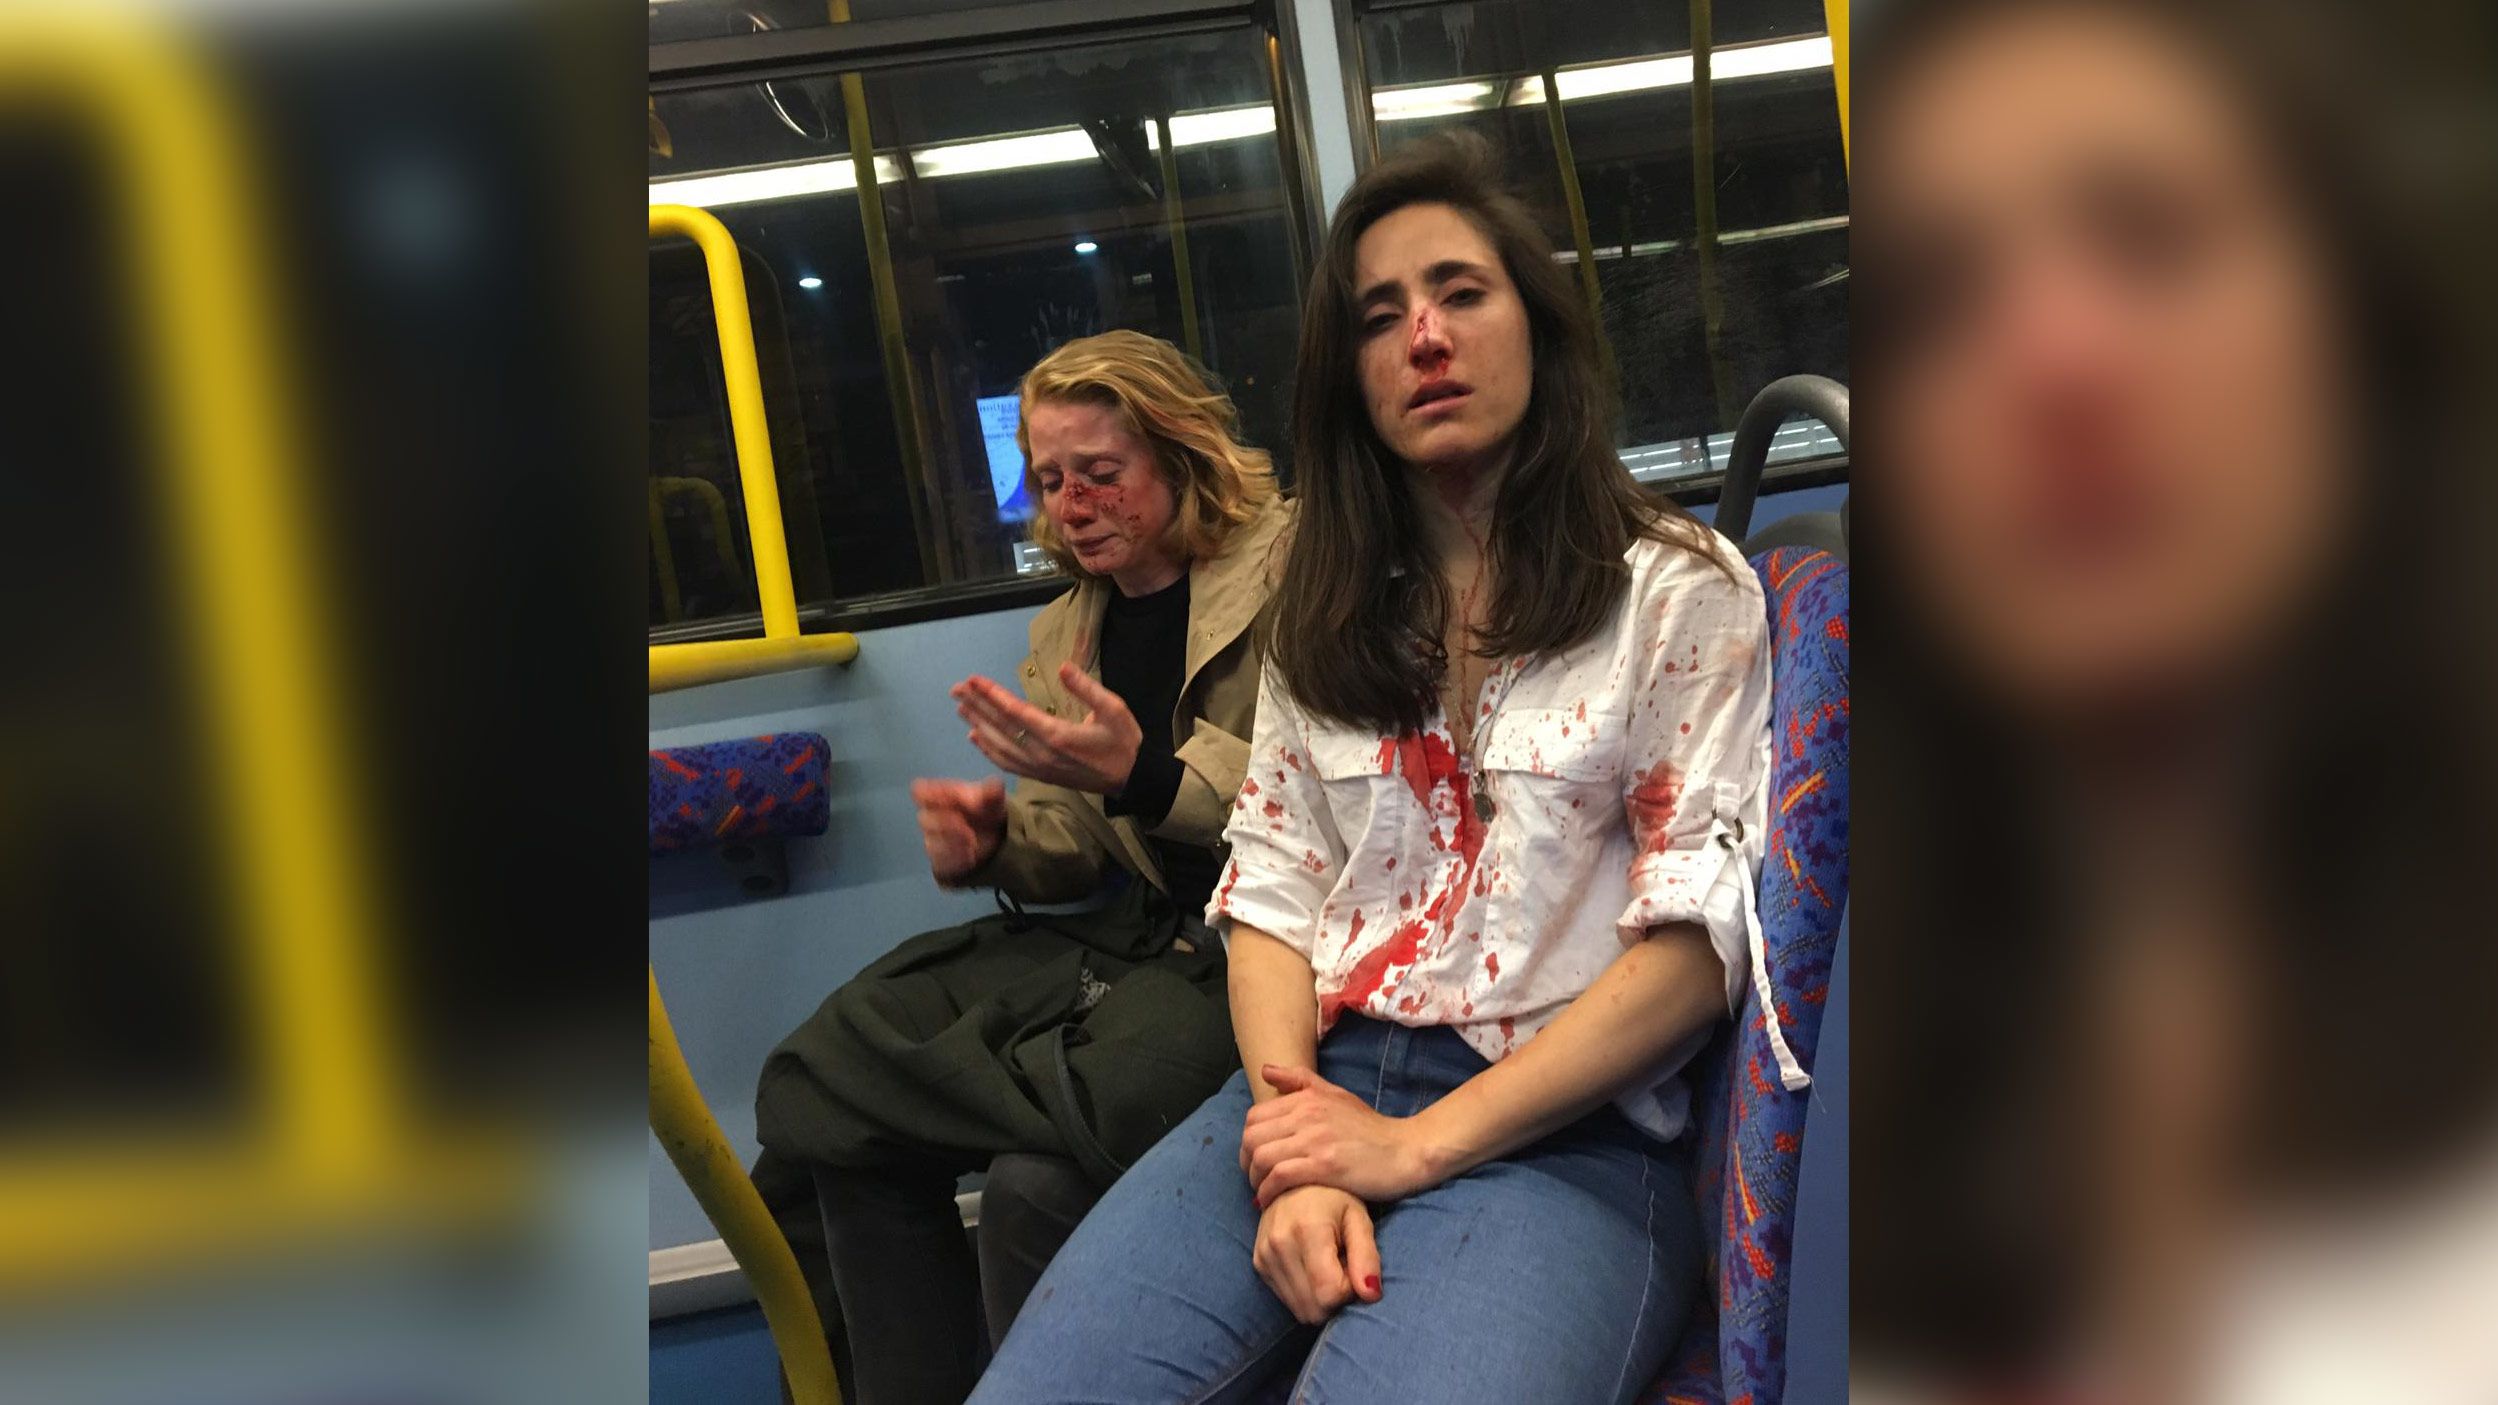 Noty Russian Bus Sex - London bus attack: Lesbian couple viciously beaten in homophobic incident |  CNN